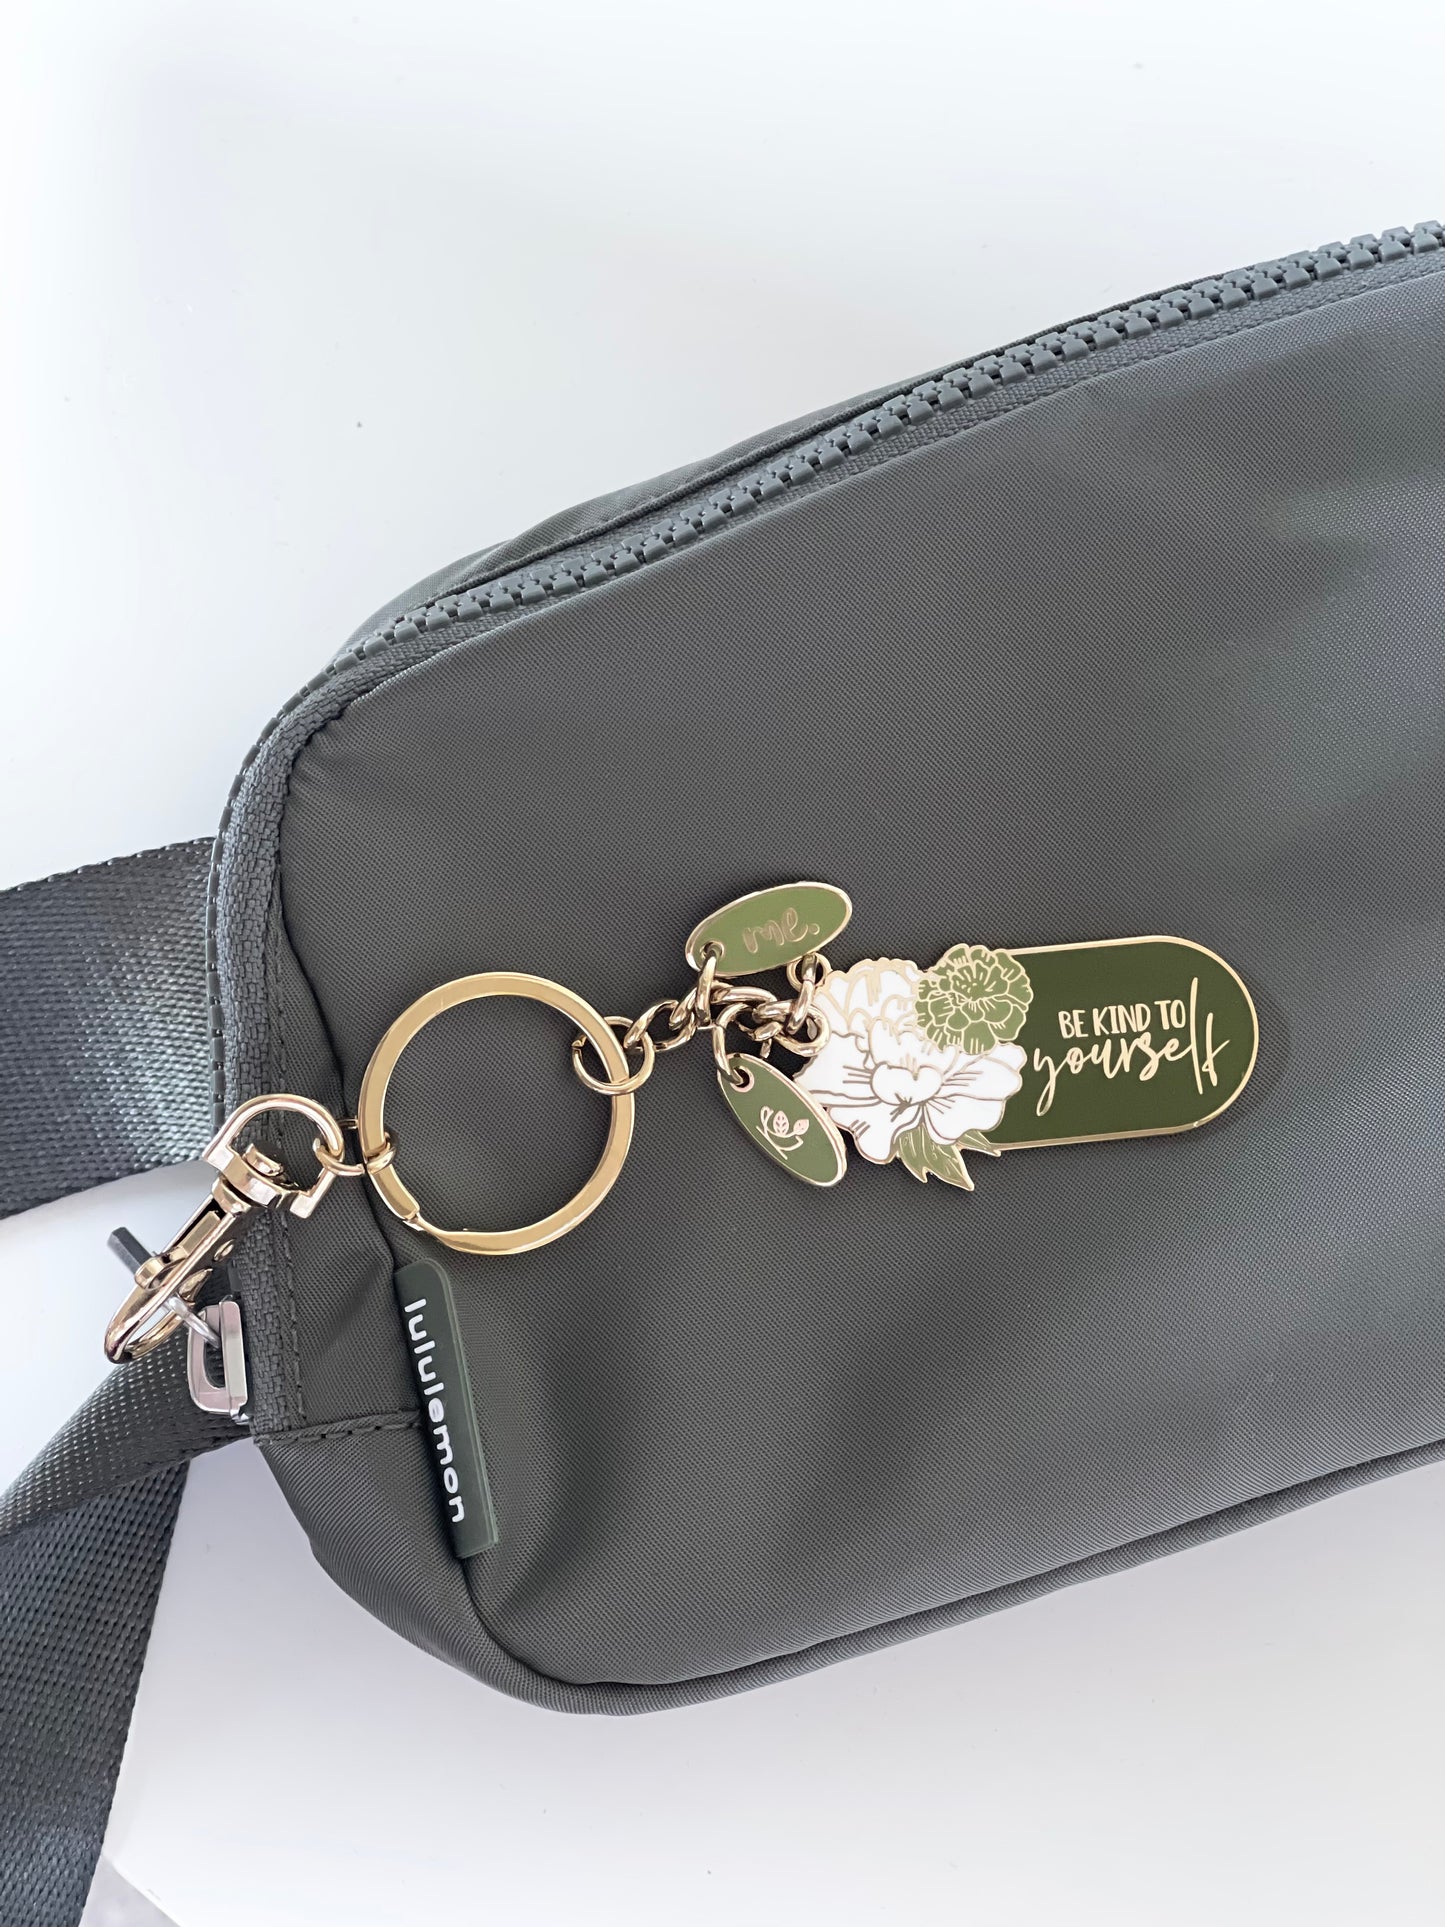 Empowering and positive keyrings with messages- Green Be Kind to Yourself Keyring with gold. Affordable and gorgeous